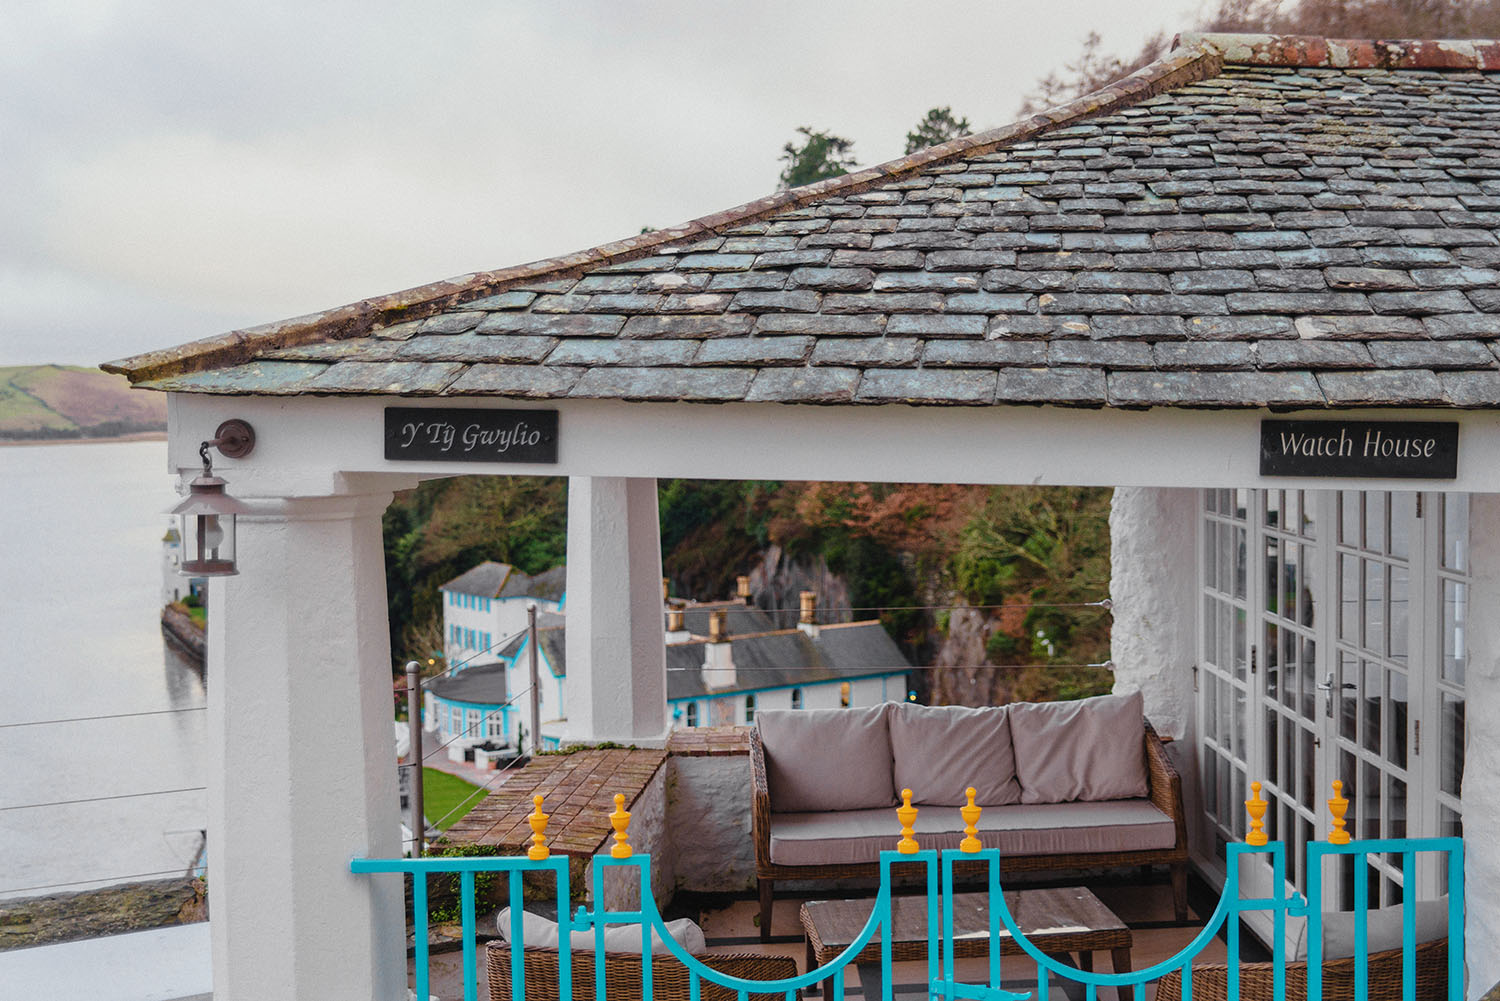 Watch House in Portmeirion